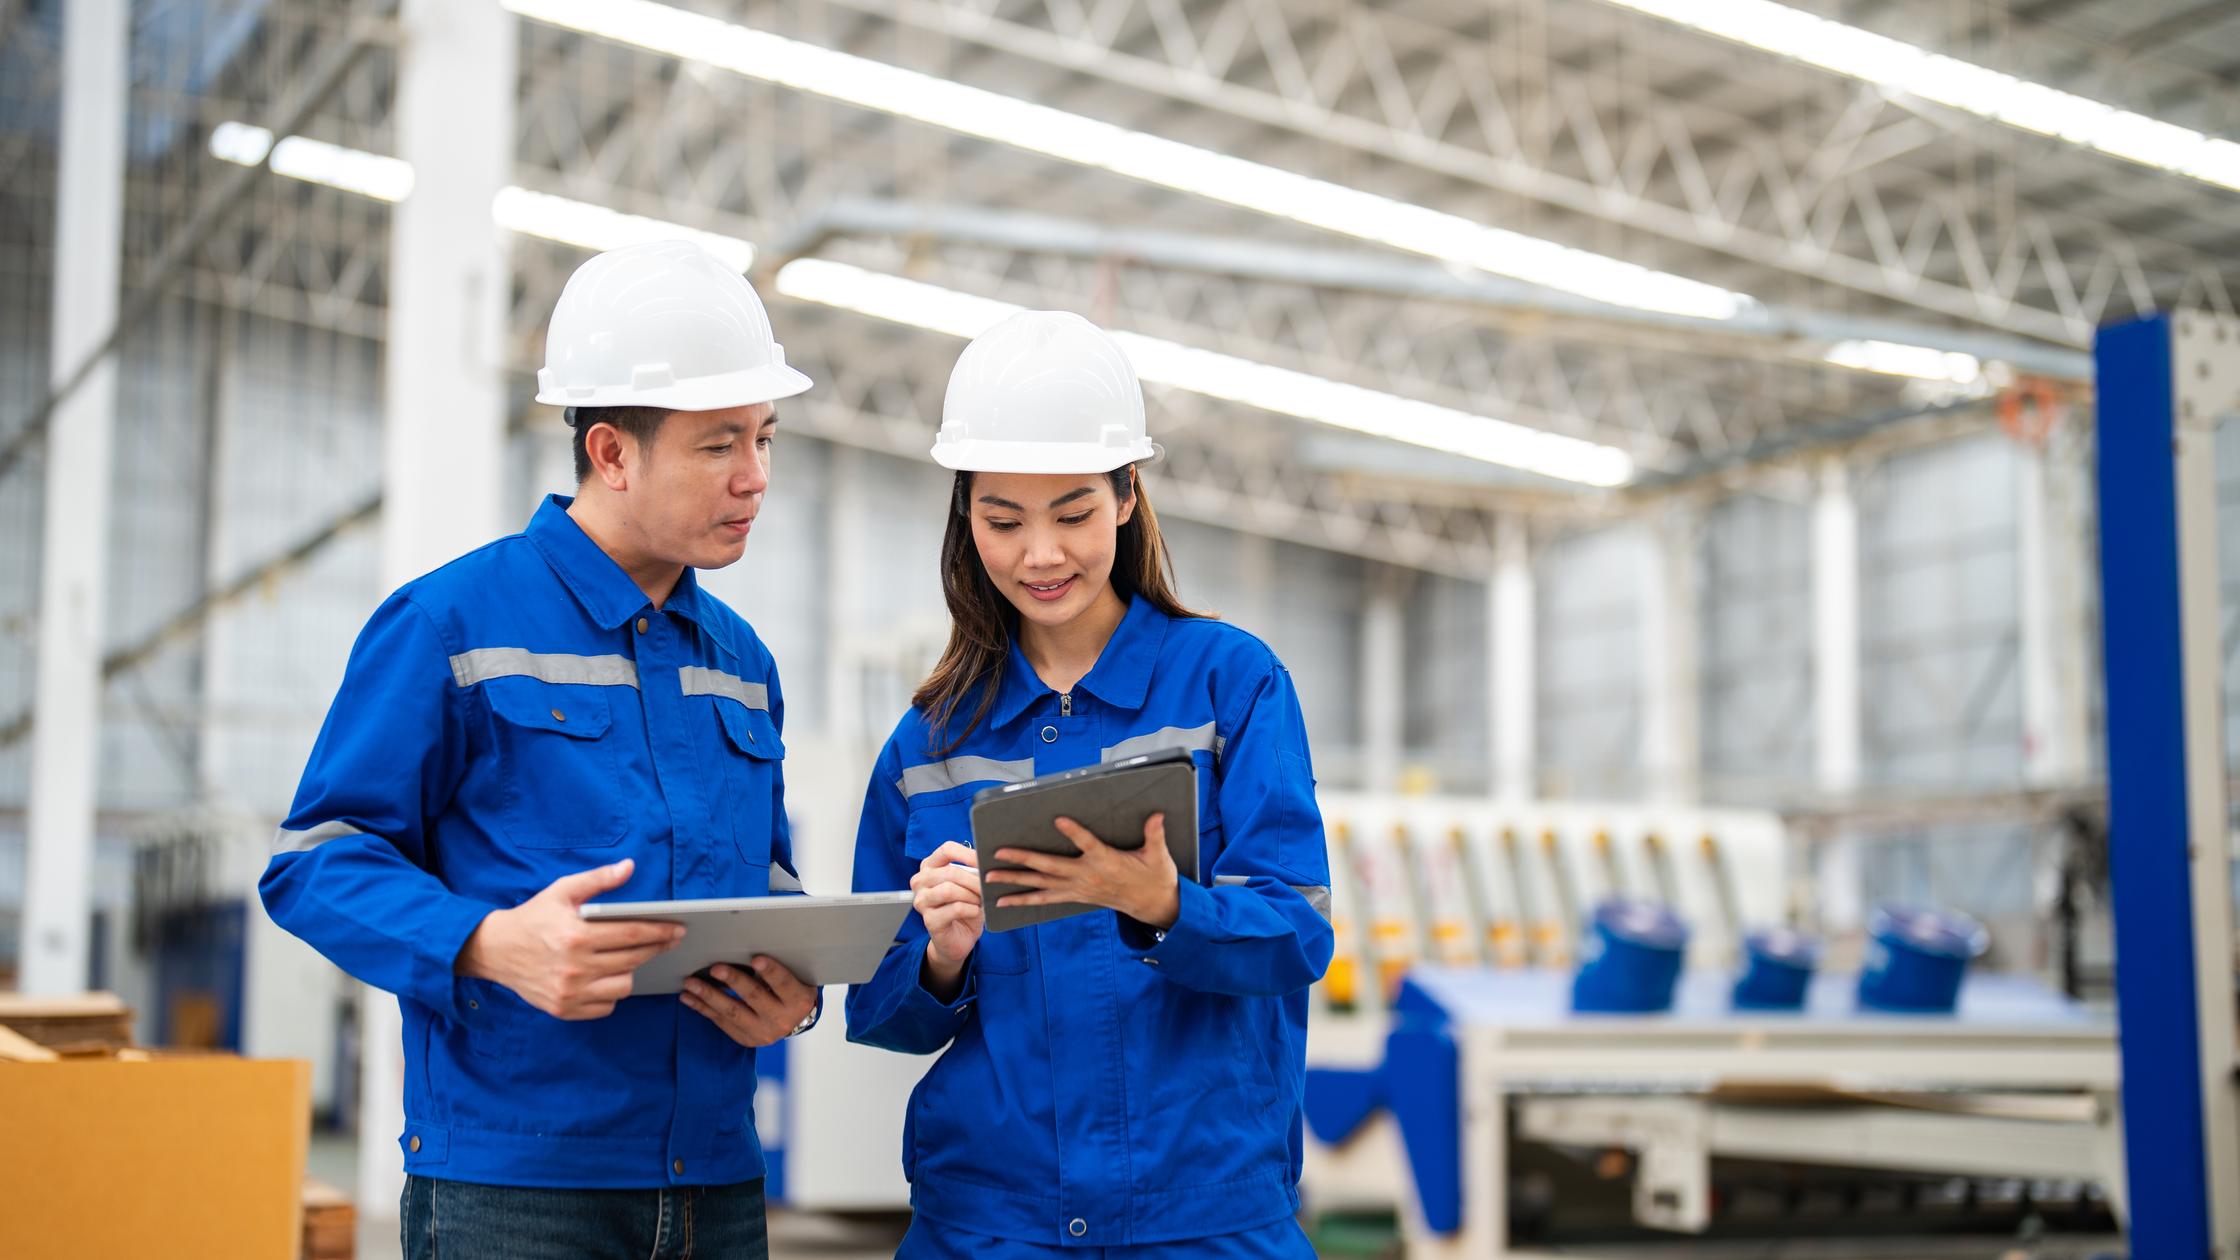 Two Managers performing a manufacturing quality check in a warehouse